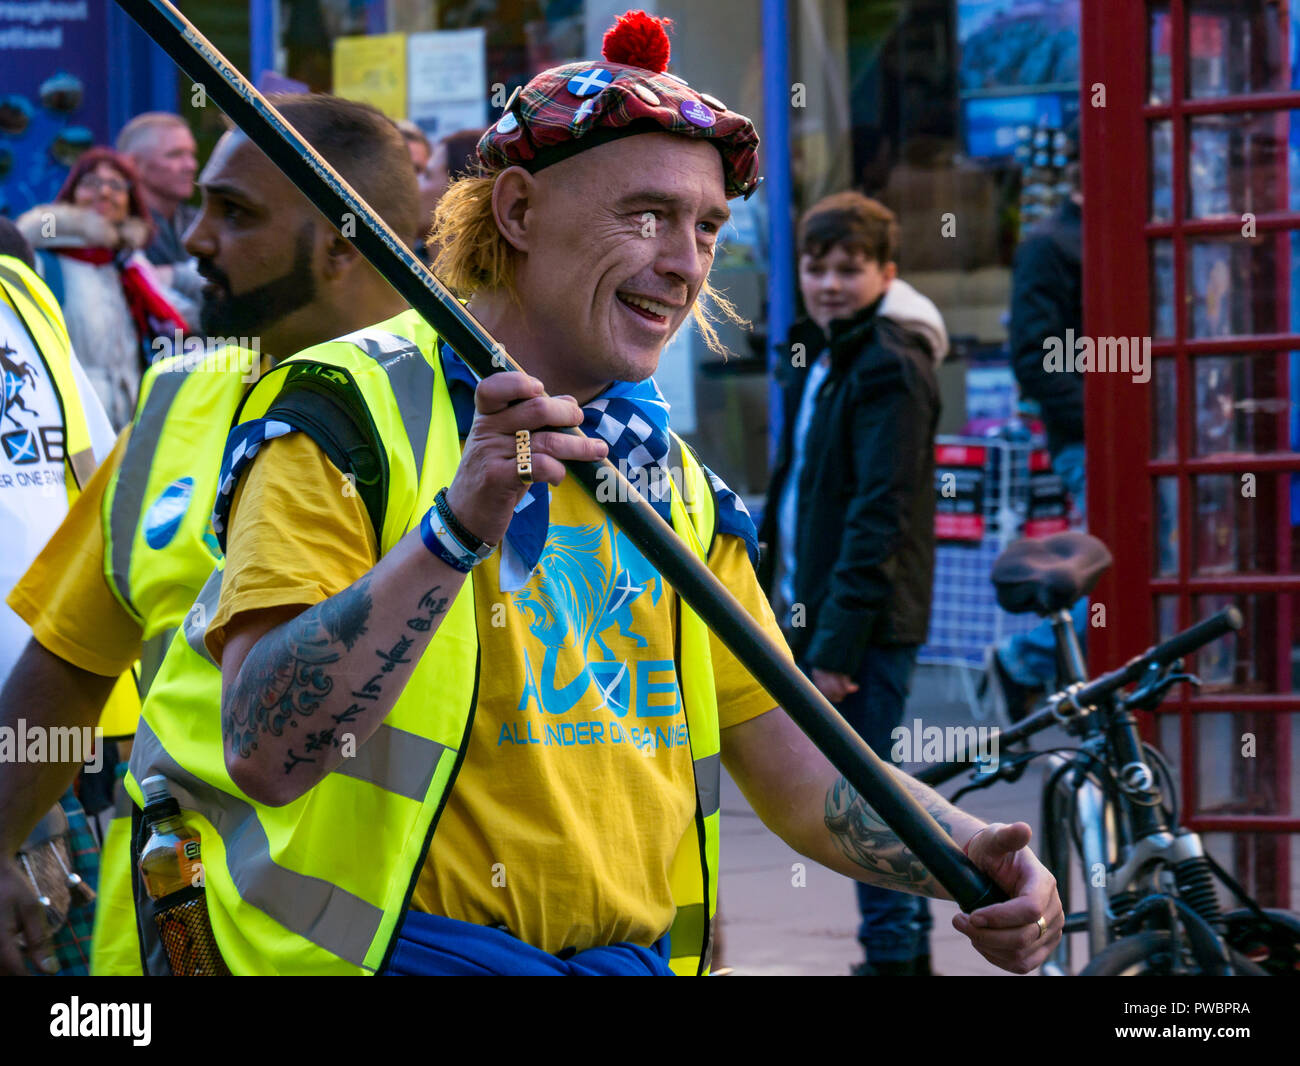 Gary J Kelly in see you Jimmy hat, organiser and leader of  All Under One Banner Scottish Independence march 2018, Royal Mile, Edinburgh, Scotland, UK Stock Photo